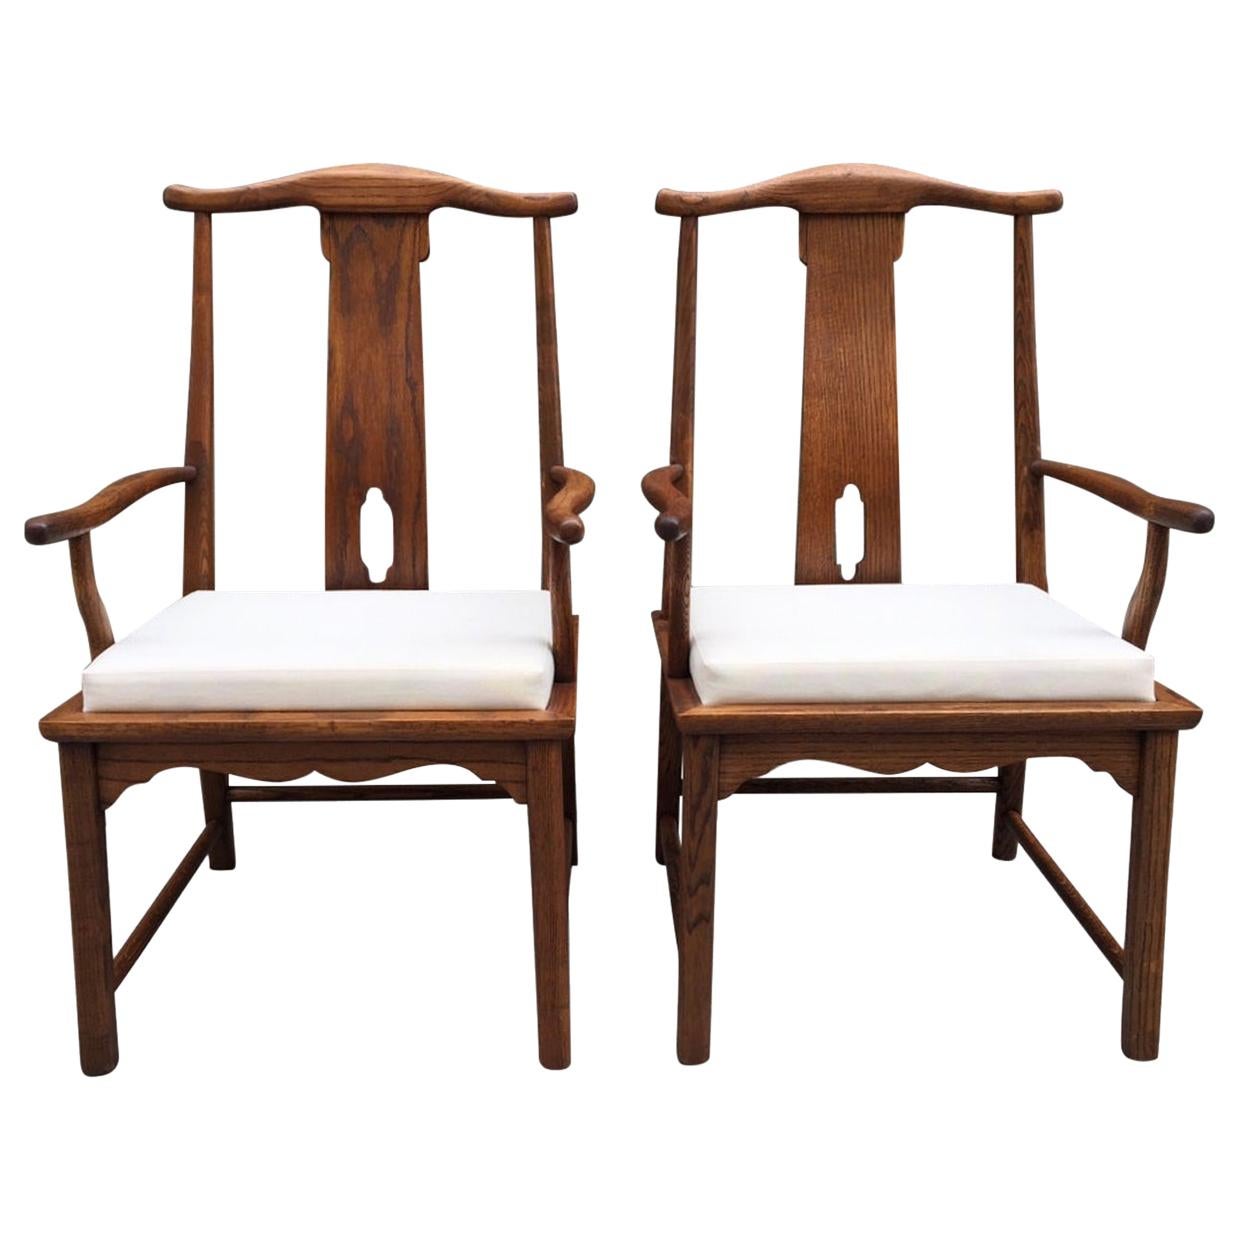 Pair of Asian Style Hardwood Side Chairs